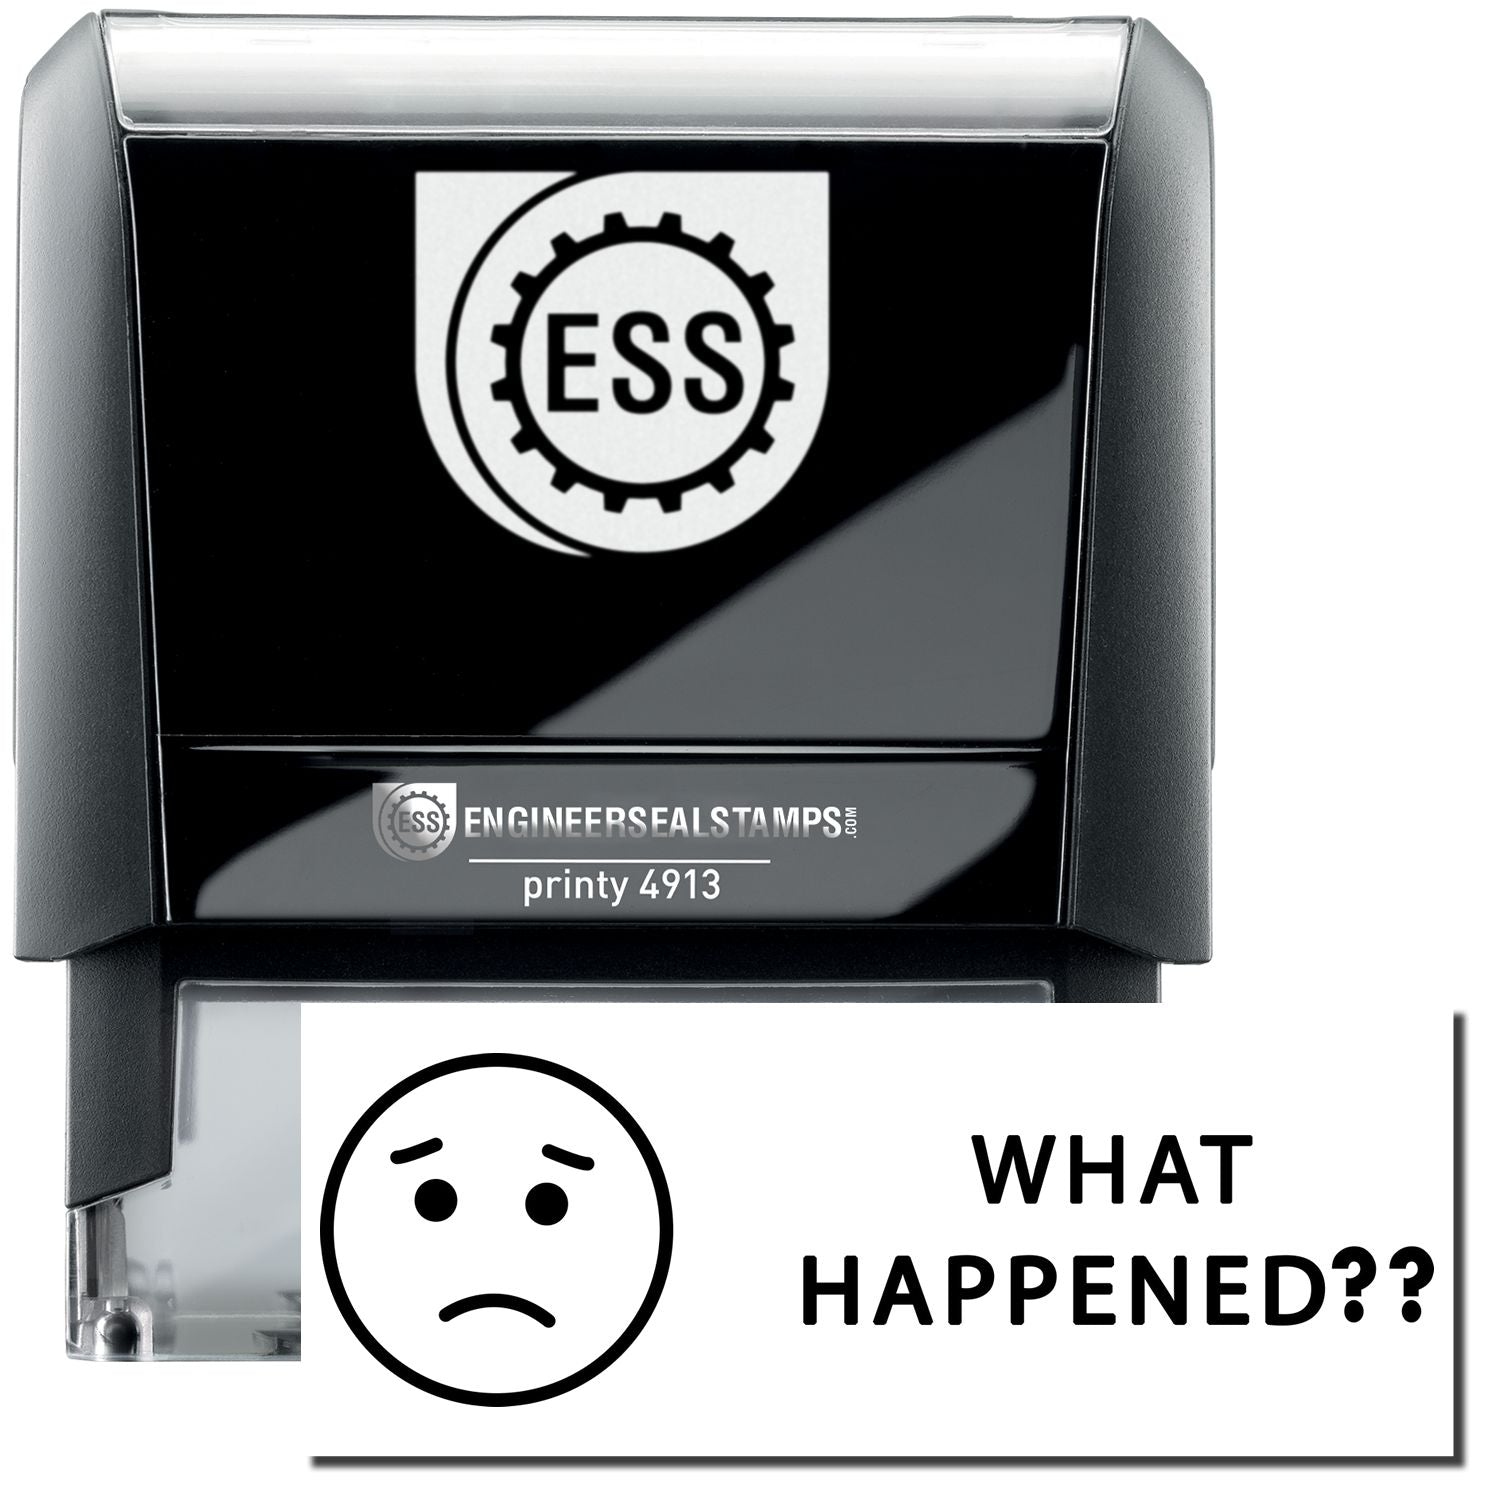 A self-inking stamp with a stamped image showing how the text "WHAT HAPPENED??" in a large font with an image of a sad face on the left side is displayed after stamping.